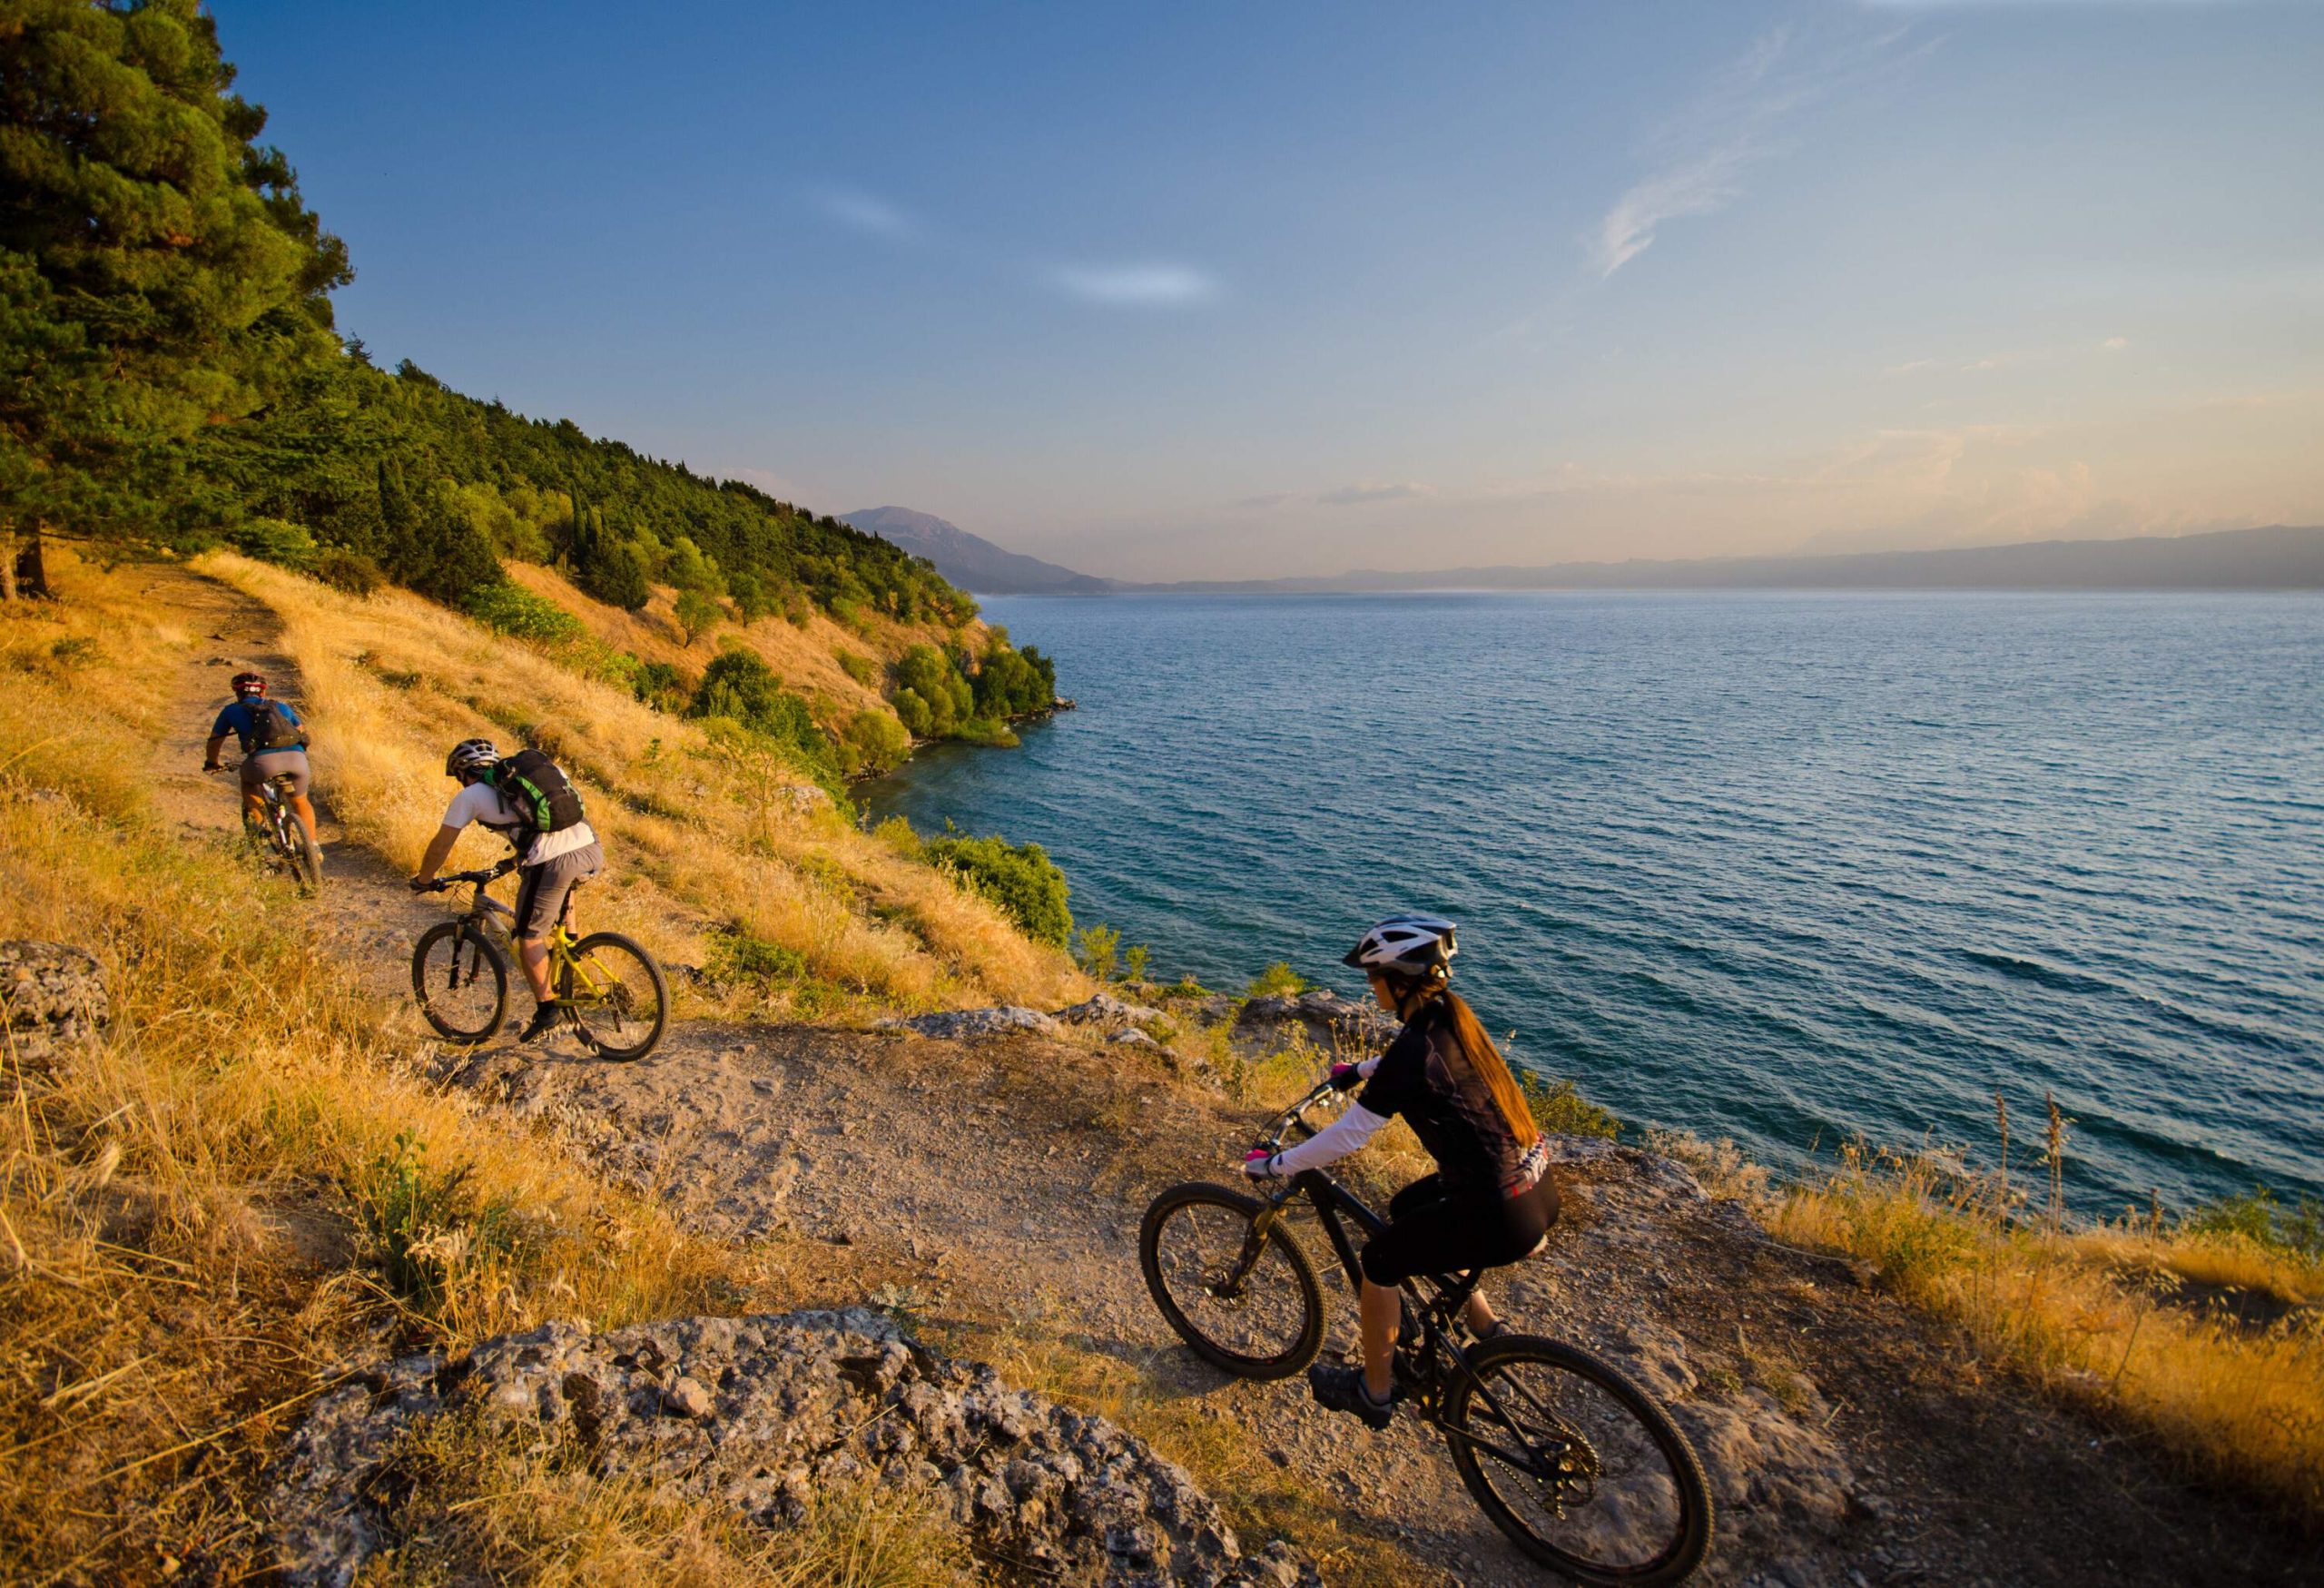 Three cyclists ride on dirt roads in lush hills by a tranquil lake at sunset.